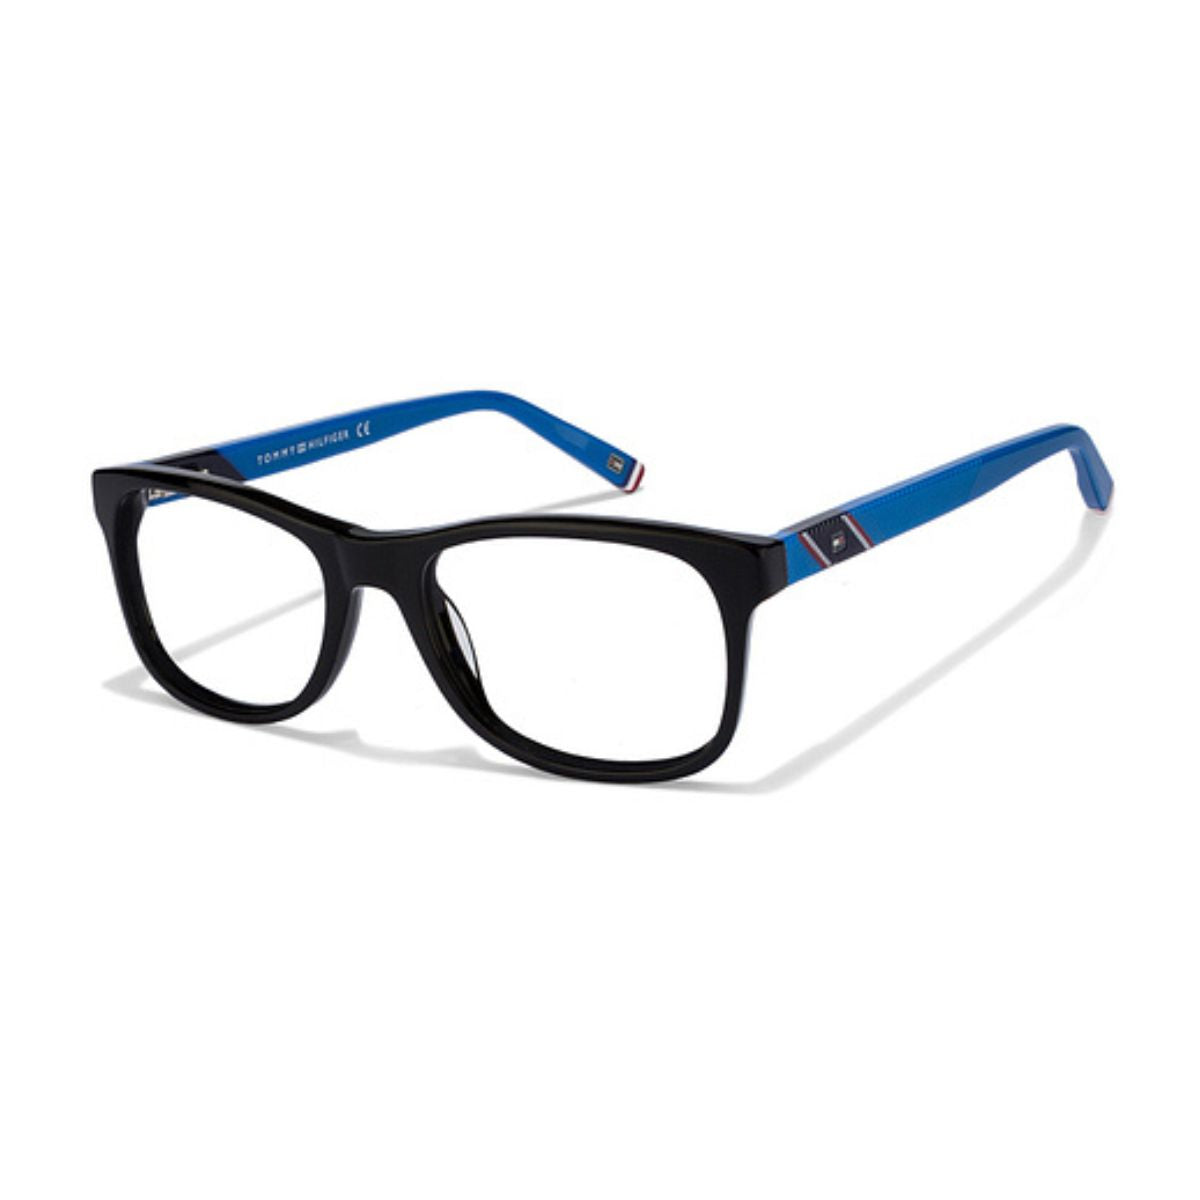 "Tommy Hilfiger 5630 C2 optical eyewear glasses frame for men's and women's at optorium"